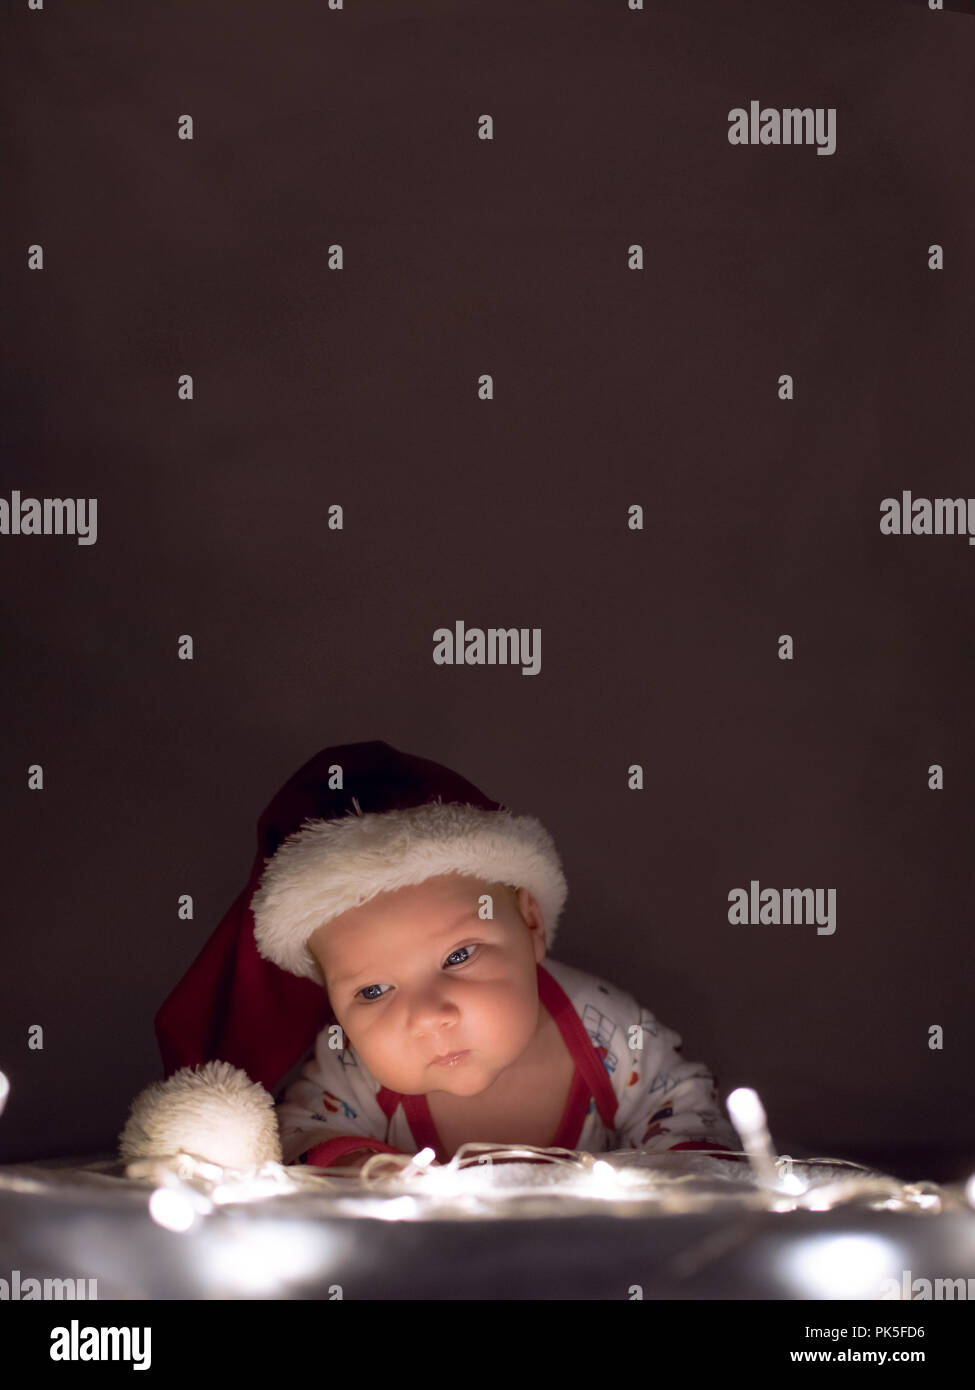 Christmas poster. Newborn baby with Santa hat lying on Christmas lights. Overhead space for text or other elements. Stock Photo